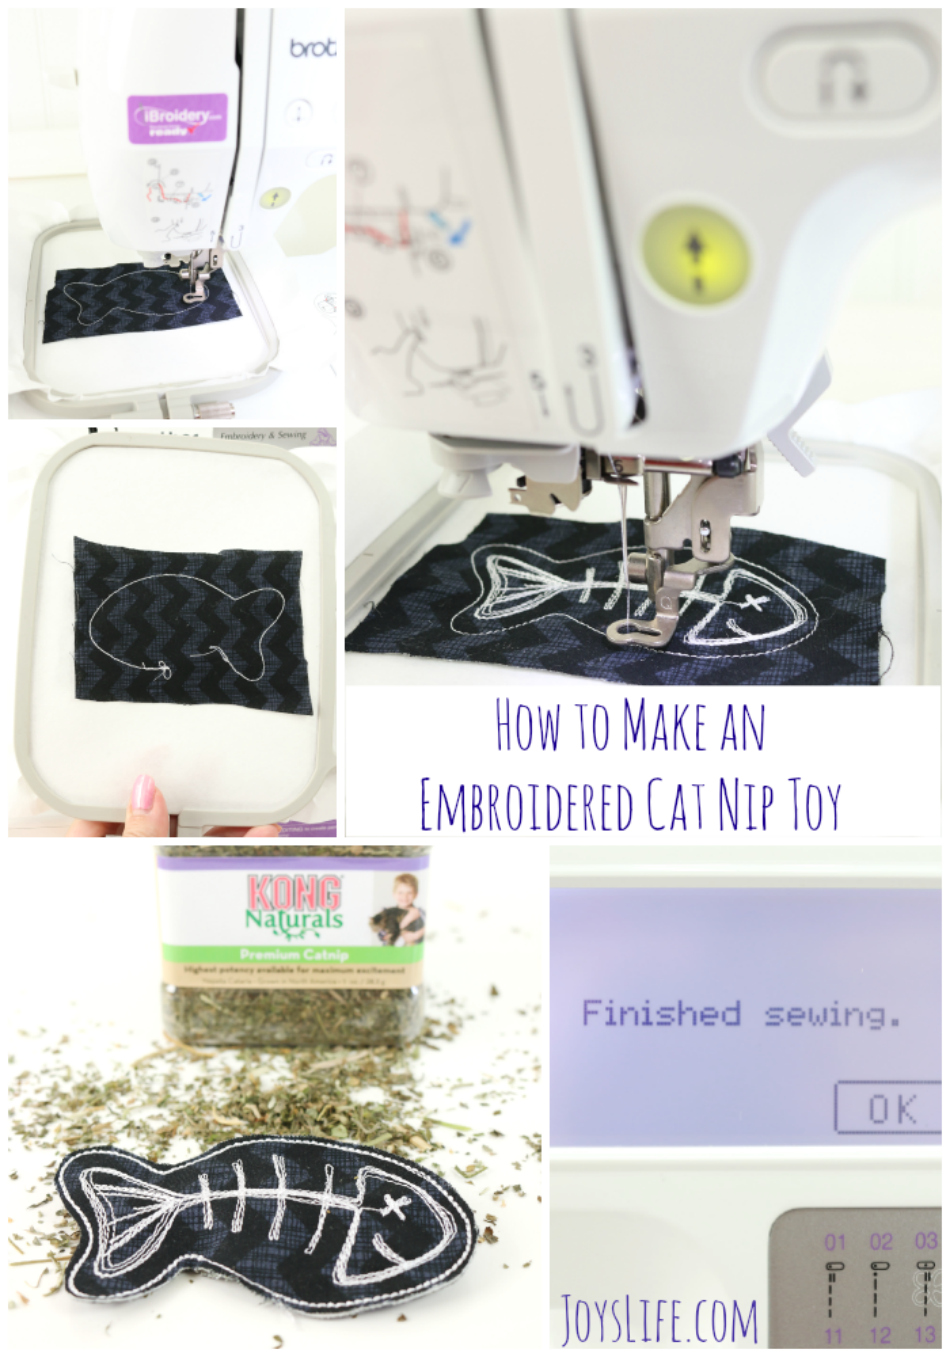 How to Make an Embroidered Cat Nip Toy #MyCatMyMuse #ad